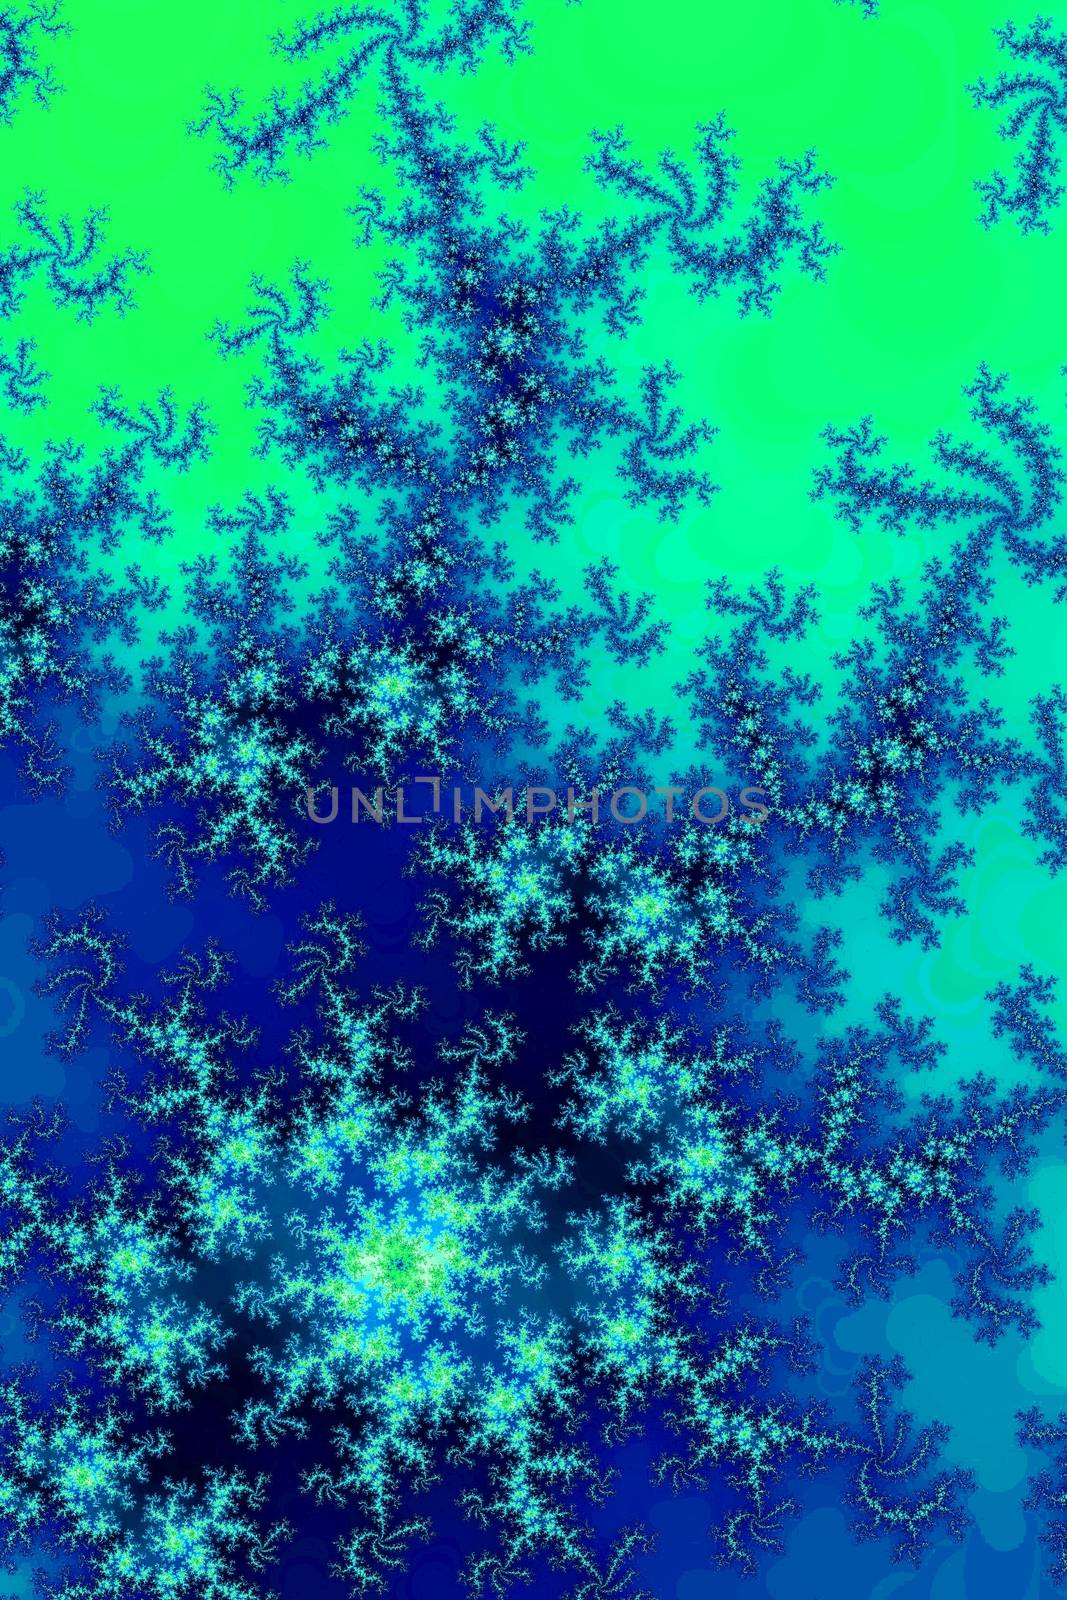 Fractal background image with glowing green colors.